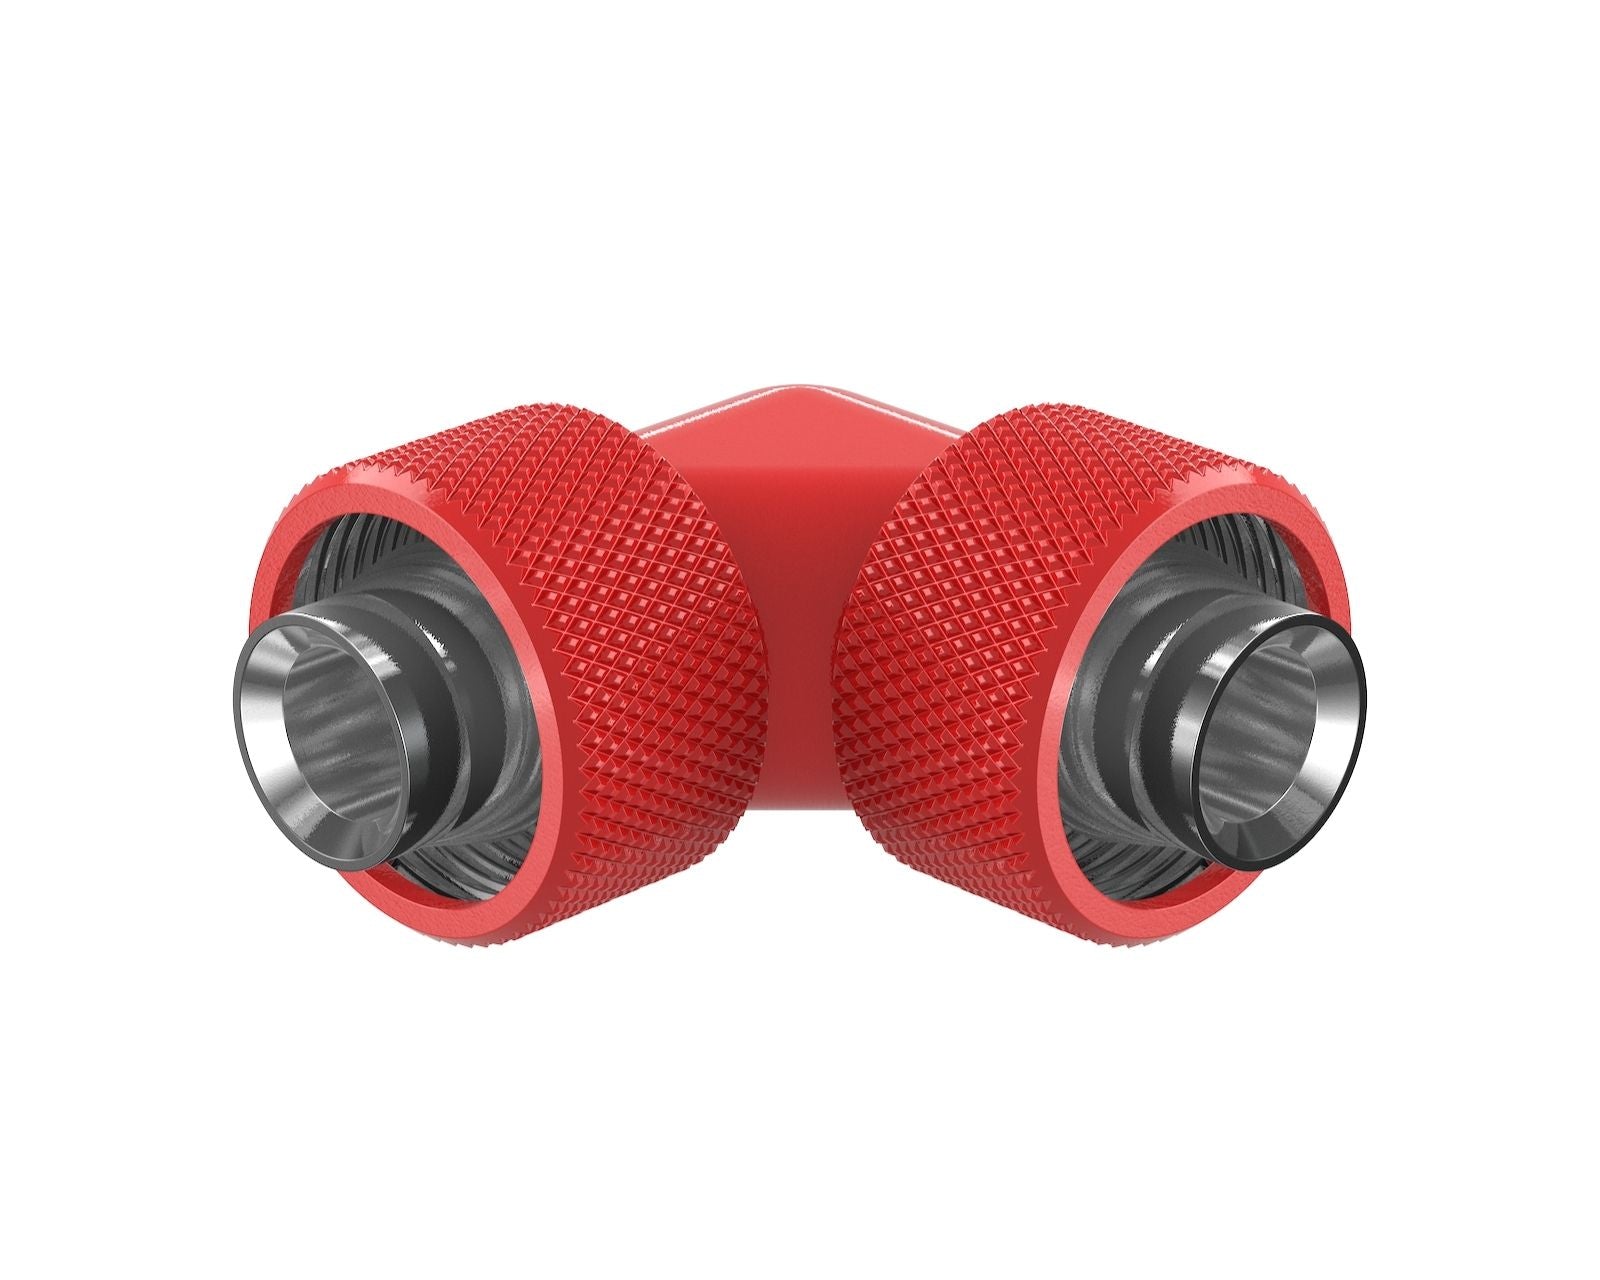 PrimoChill SecureFit SX - Premium 90 Degree Compression Fitting Set For 1/2in ID x 3/4in OD Flexible Tubing (F-SFSX3490) - Available in 20+ Colors, Custom Watercooling Loop Ready - Razor Red